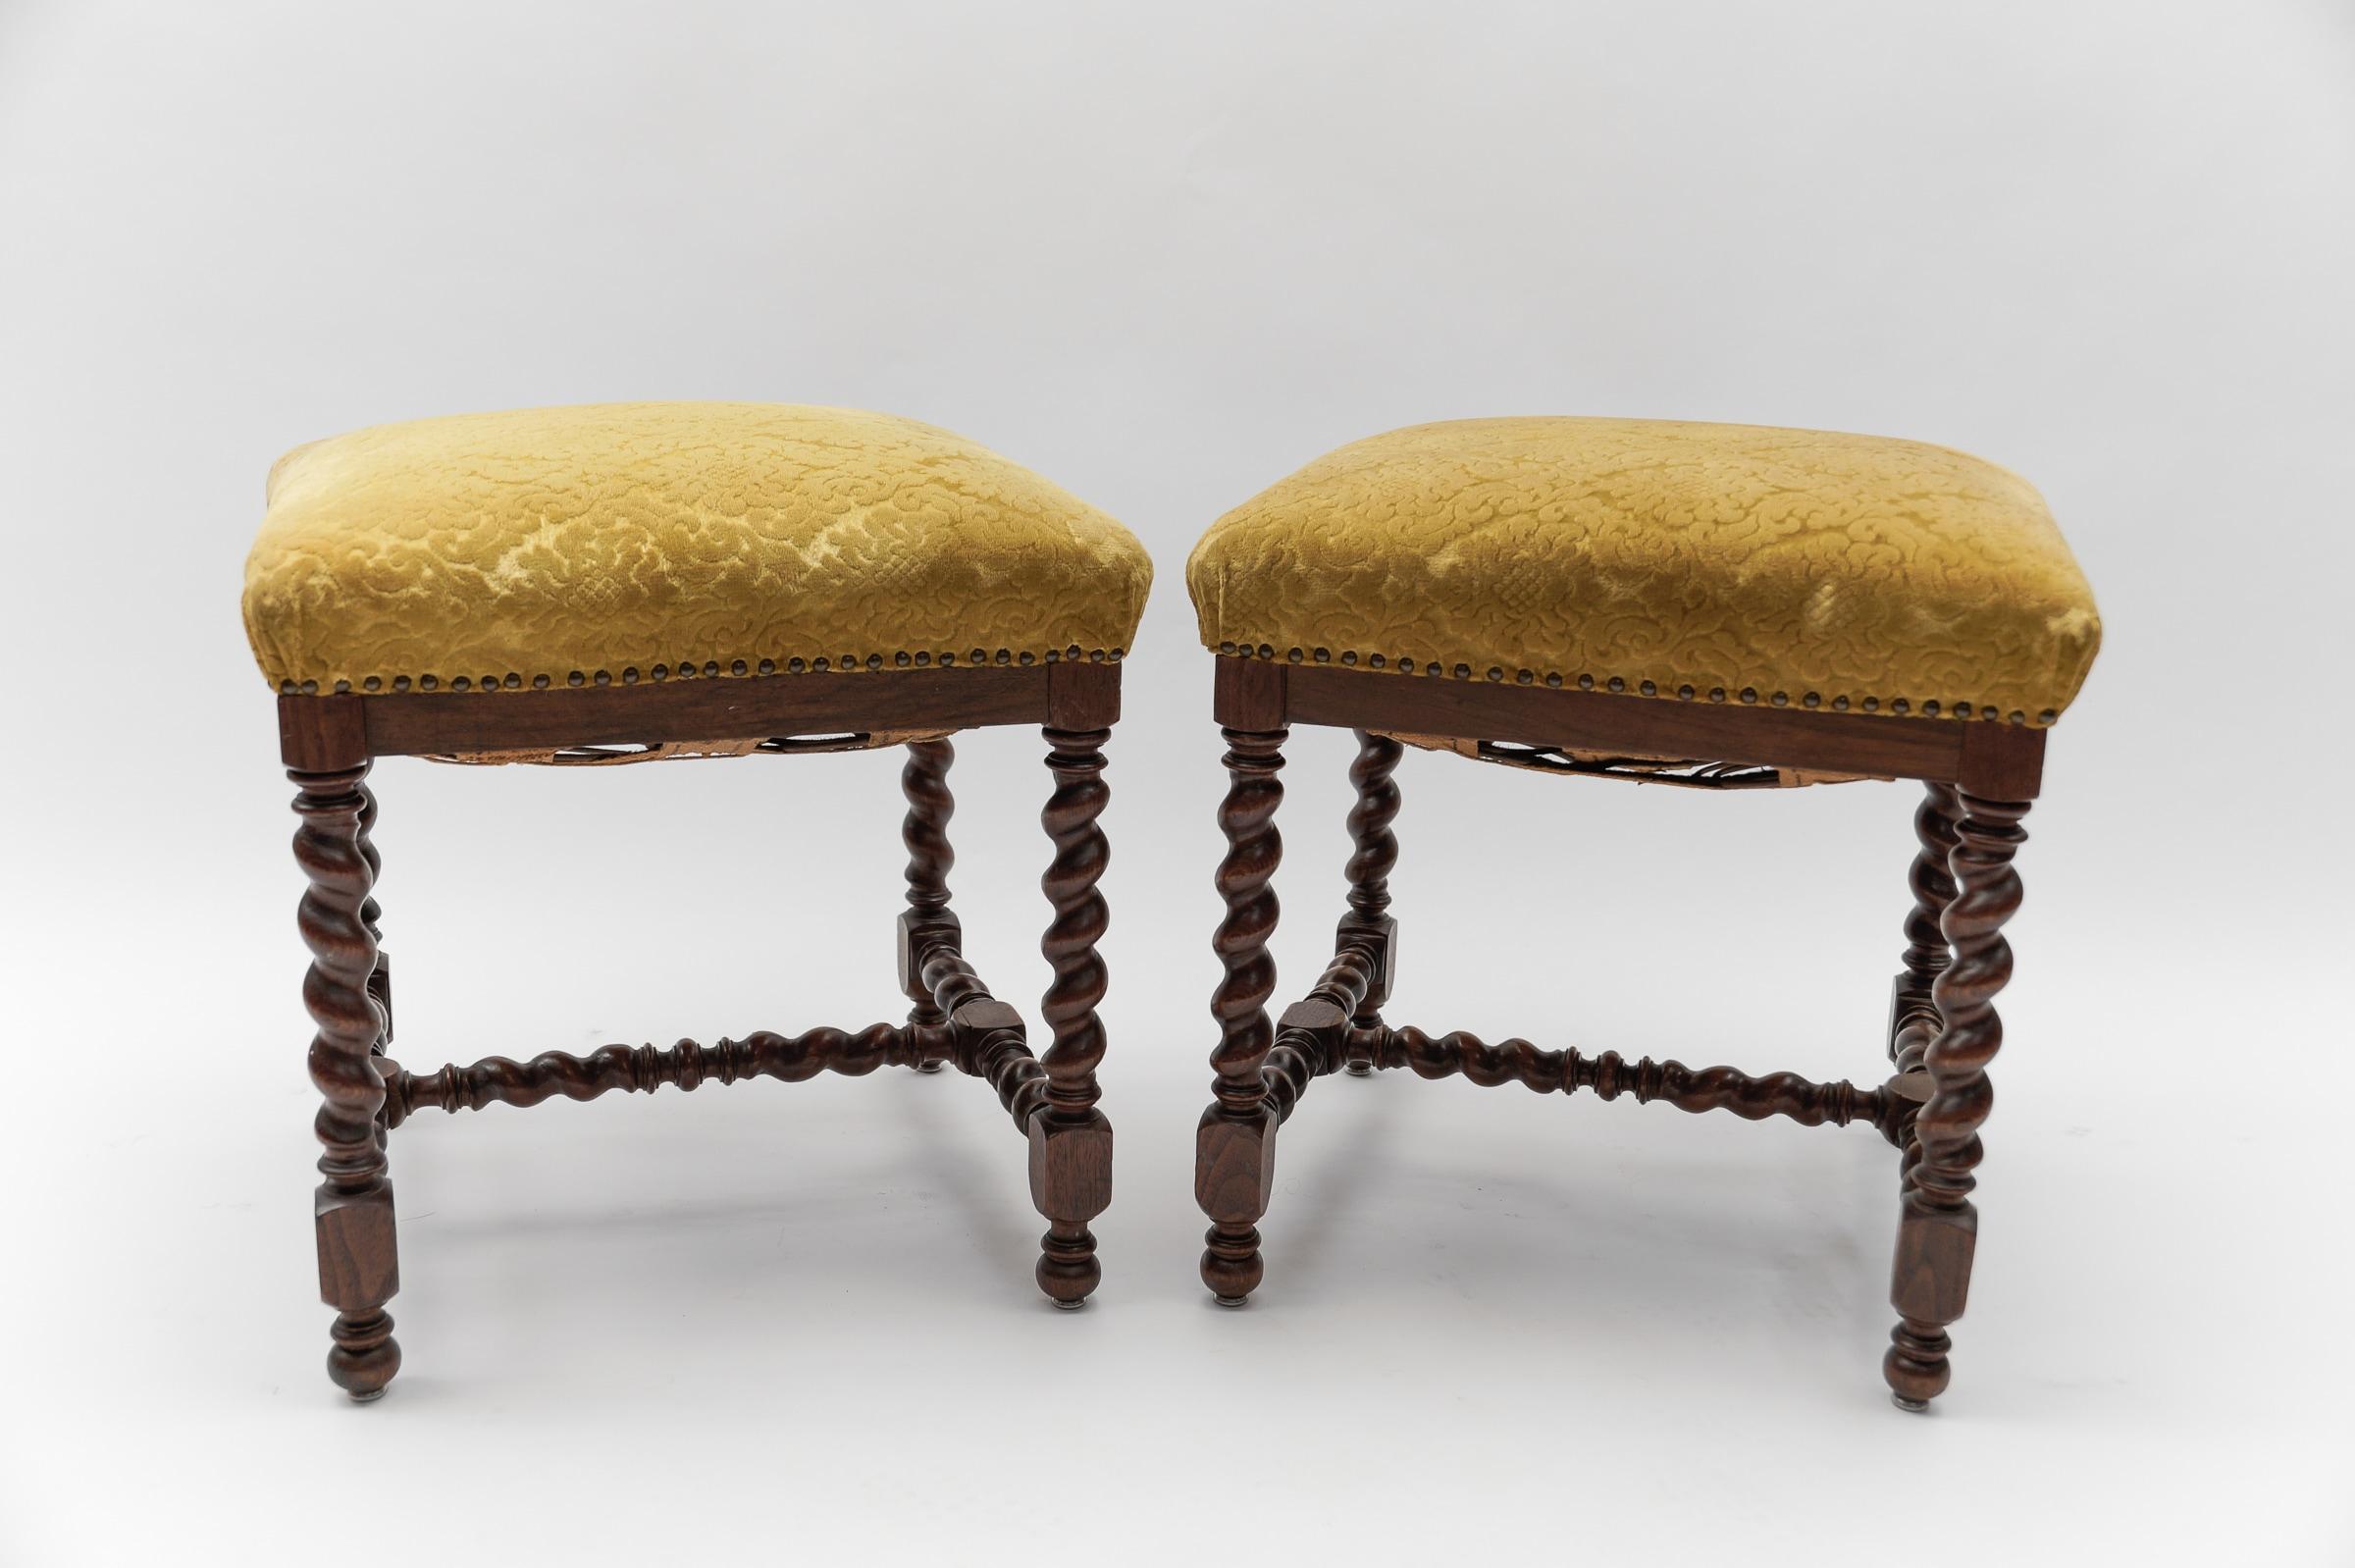 Fabric Two French Barley Wood Stools in Louis XIII Style, ca. 1870s For Sale